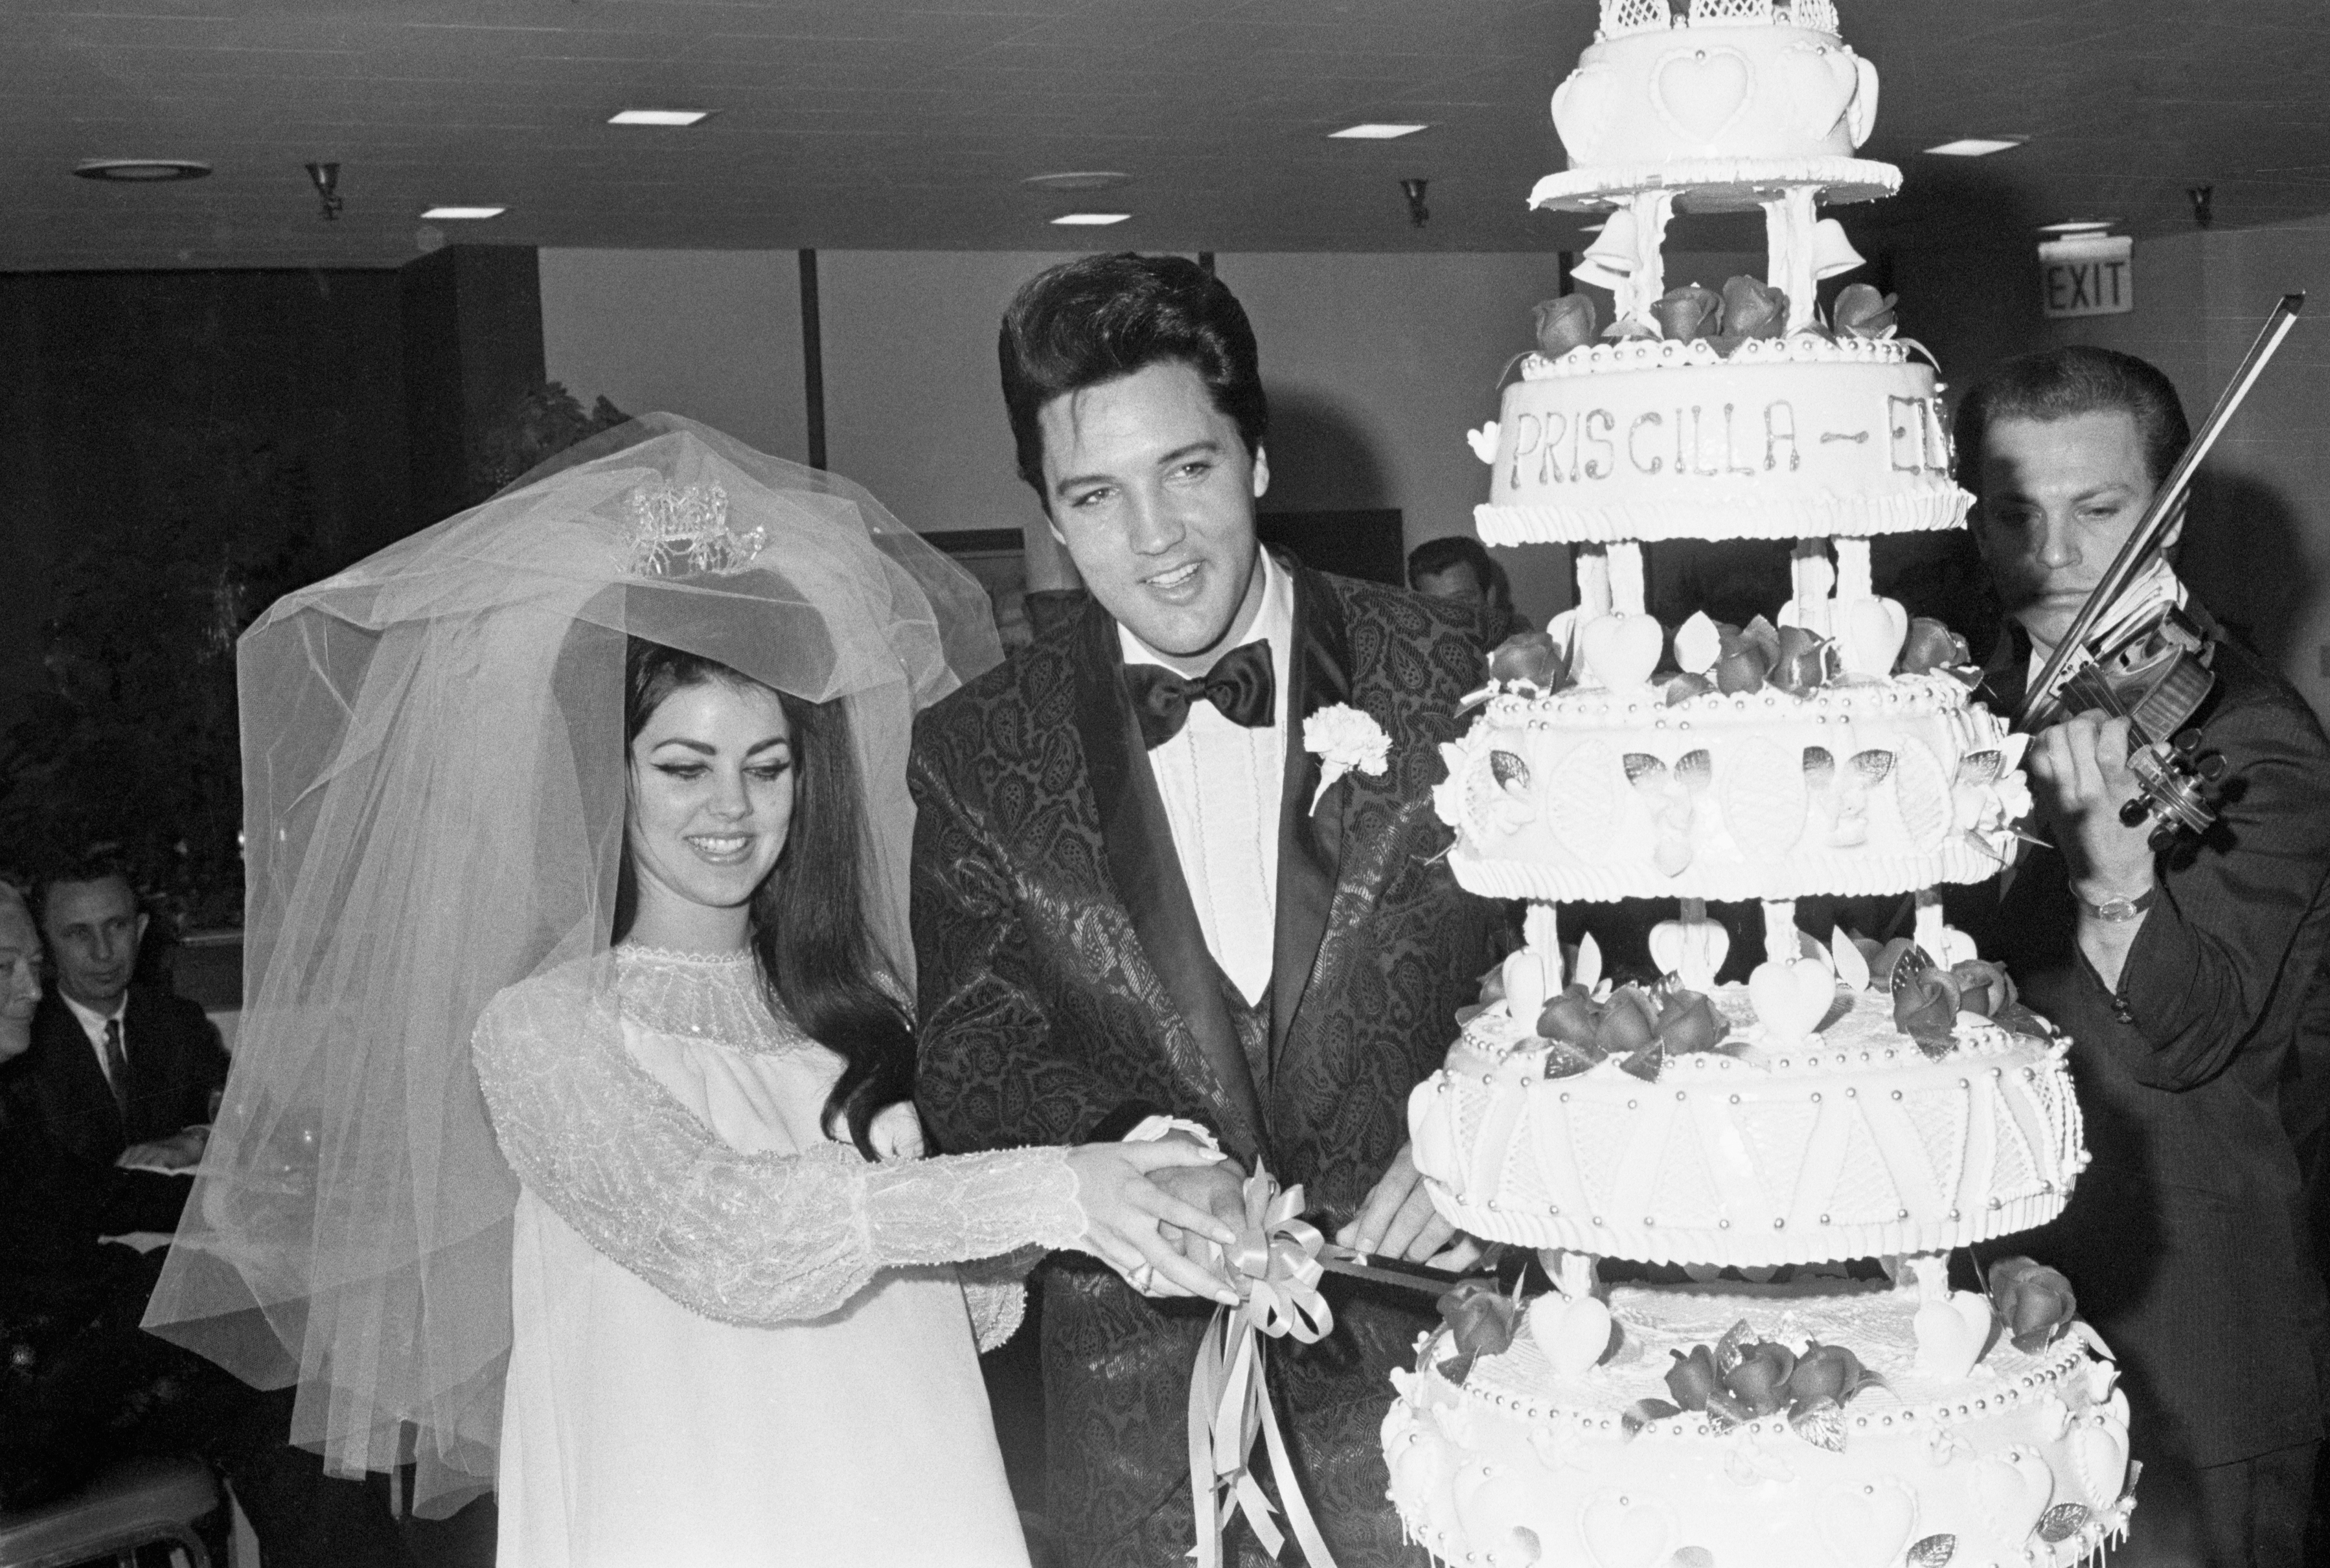 Close-up of the real Elvis and Priscilla smiling as they cut their wedding cake